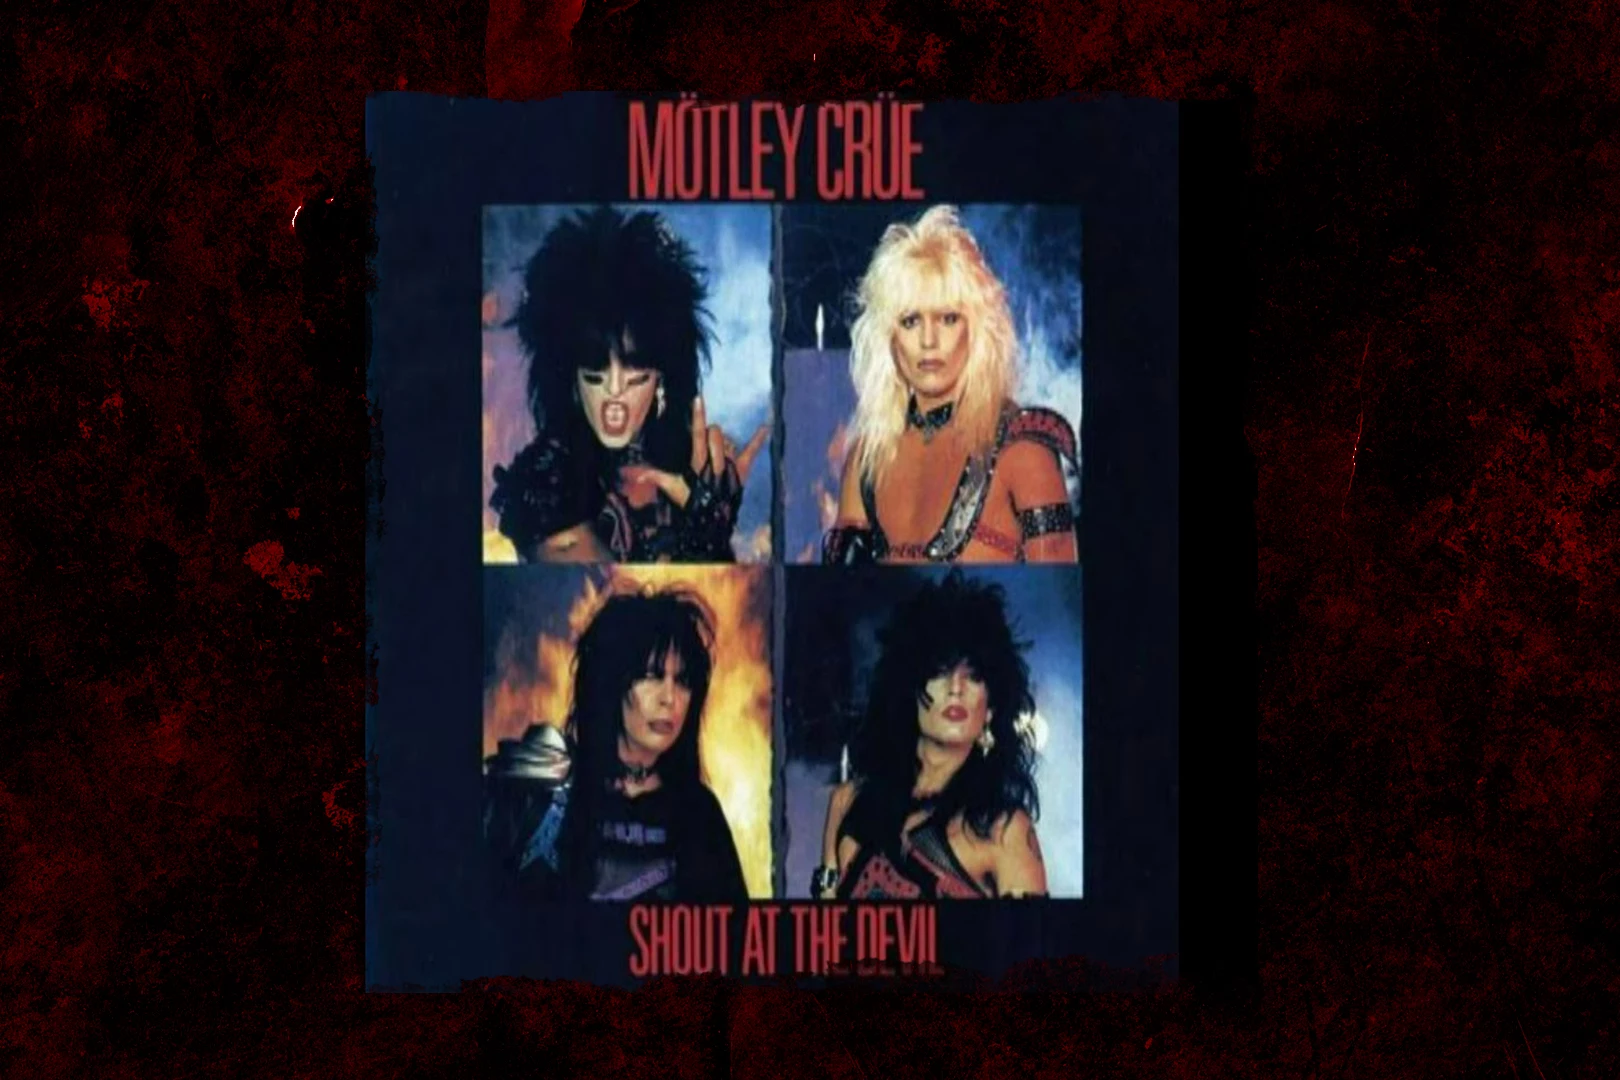 39 Years Ago: Motley Crue Release 'Shout at the Devil'